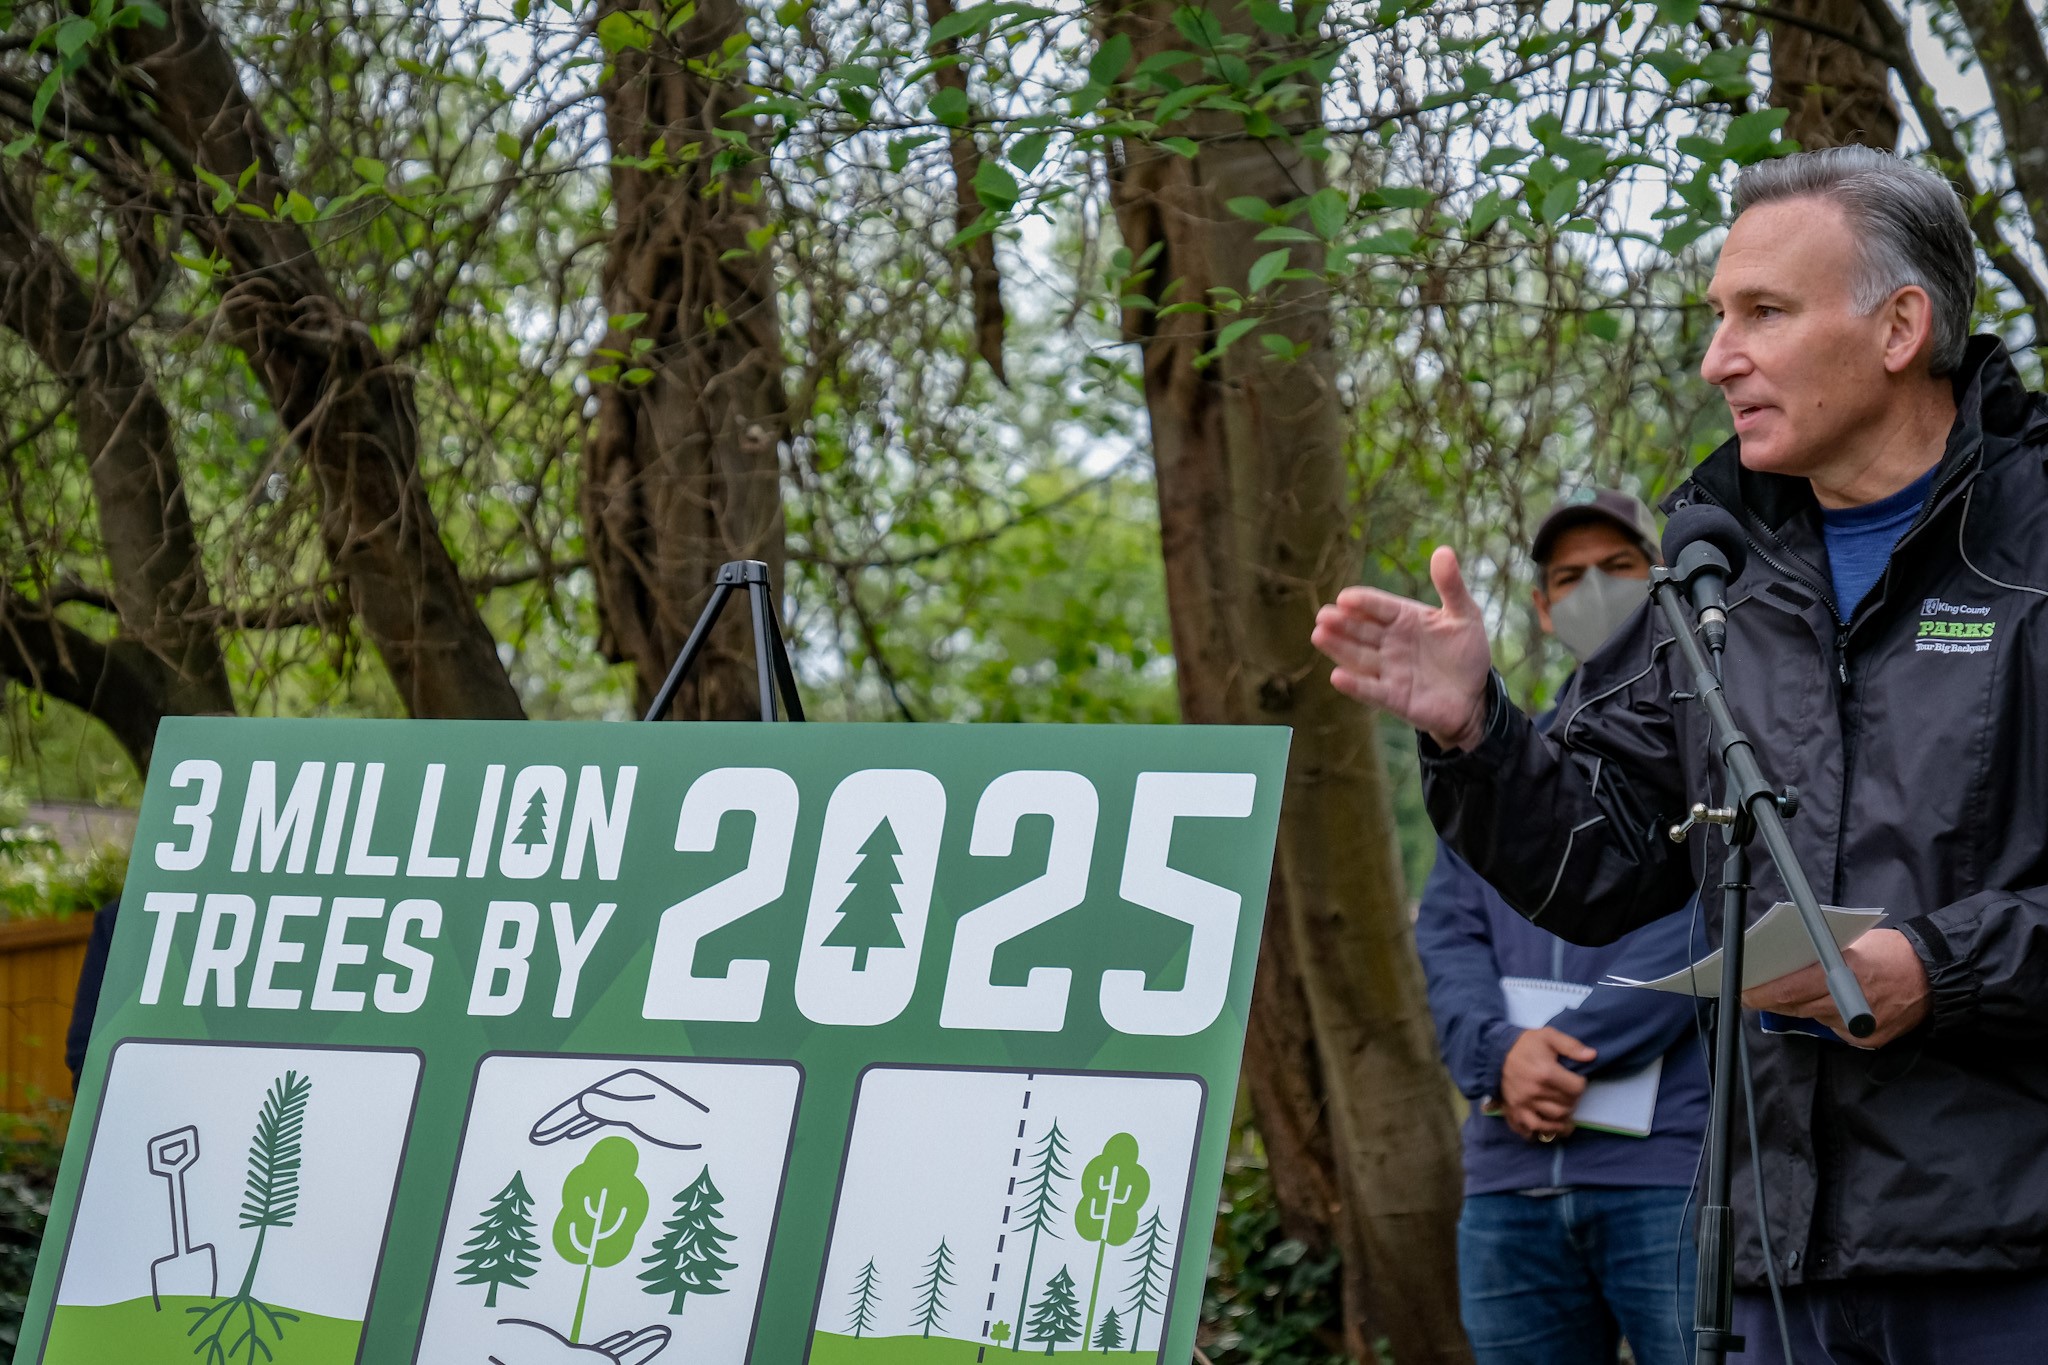 King County Executive Dow Constantine speaking at a 3 Million Trees event.